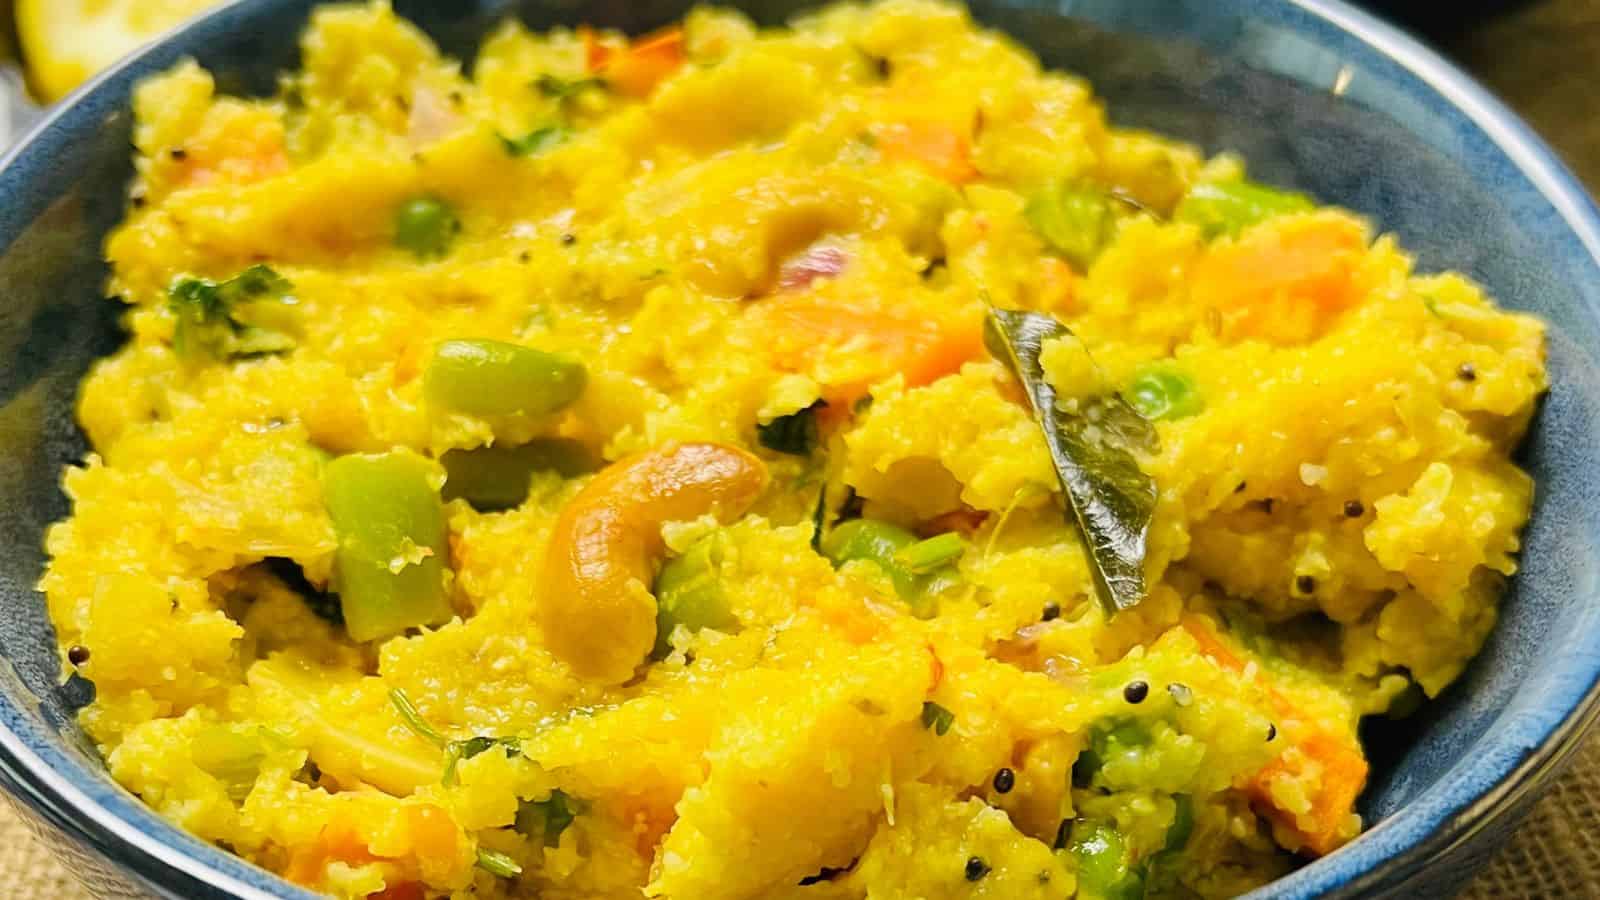 A bowl of colorful upma, an indian dish made with rice and lentils, garnished with cashews and herbs.